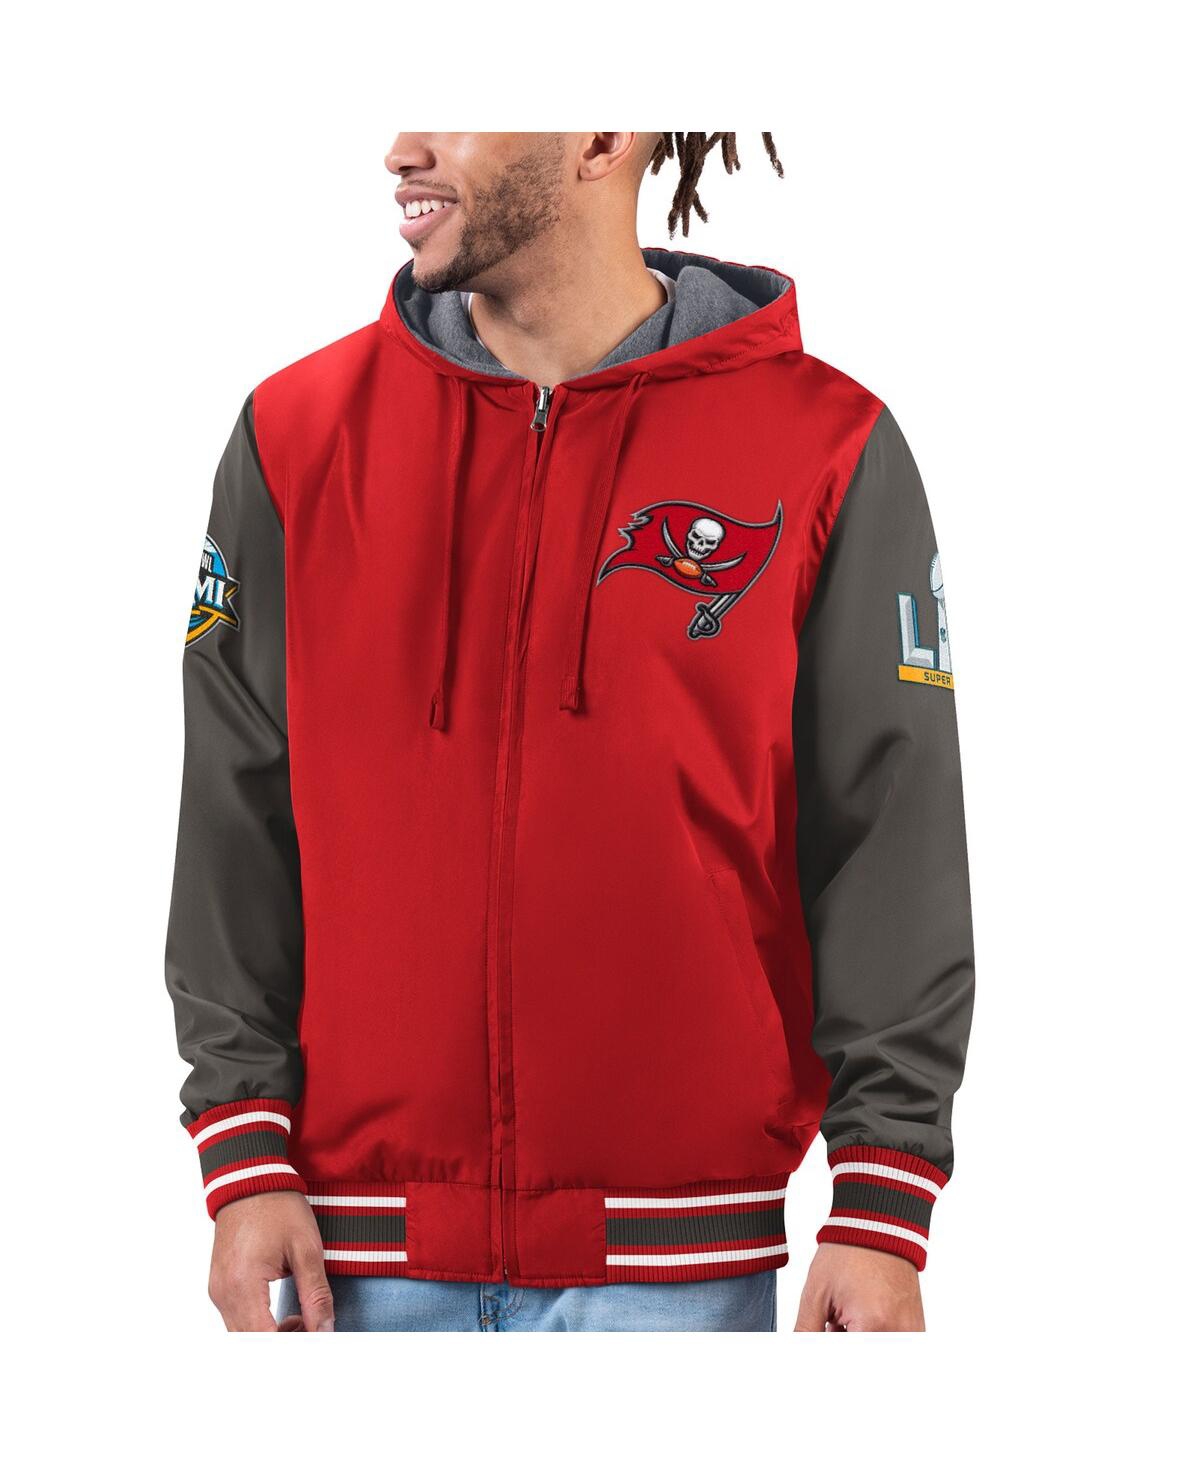 Men's G-iii Sports by Carl Banks Red, Pewter Tampa Bay Buccaneers Commemorative Reversible Full-Zip Jacket - Red, Pewter